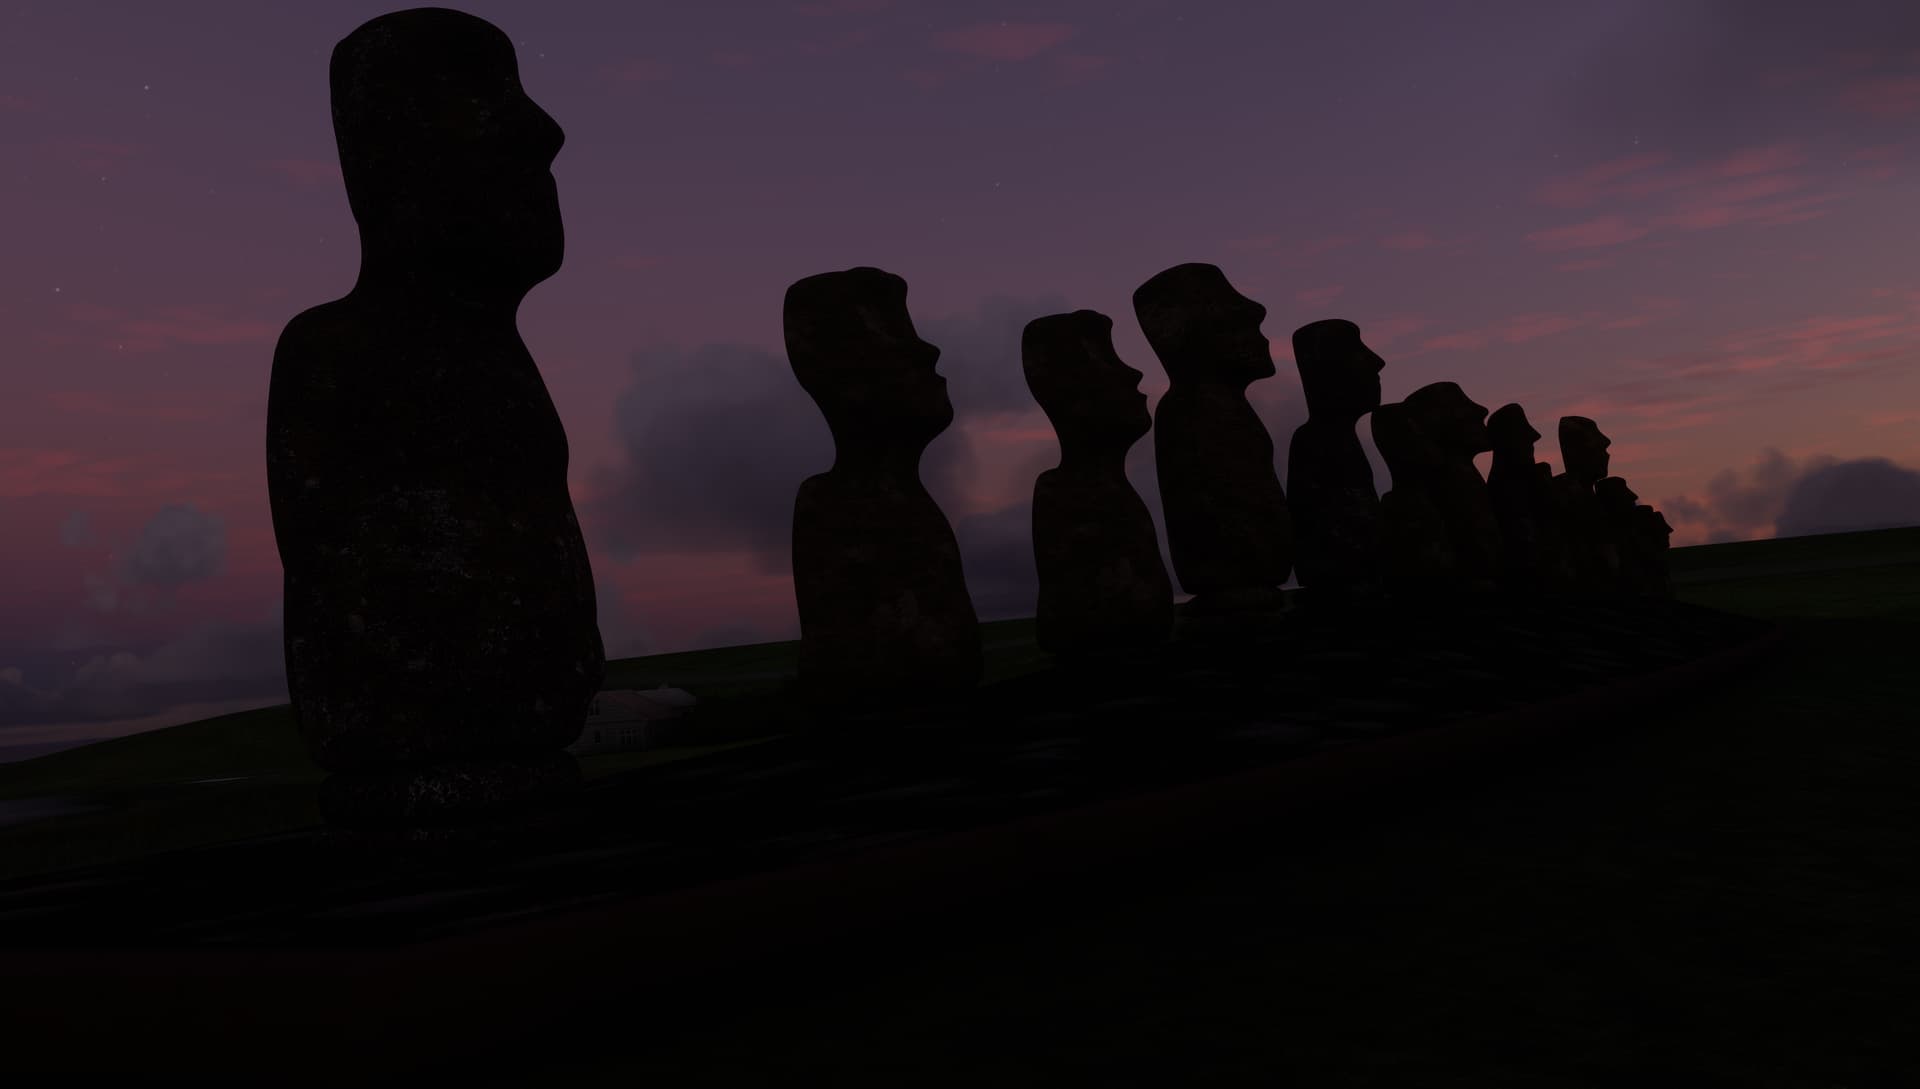 The Moai statues (large rock carvings in the shape of human heads) from Easter Island at dusk. The sky in the background is purple/pink.